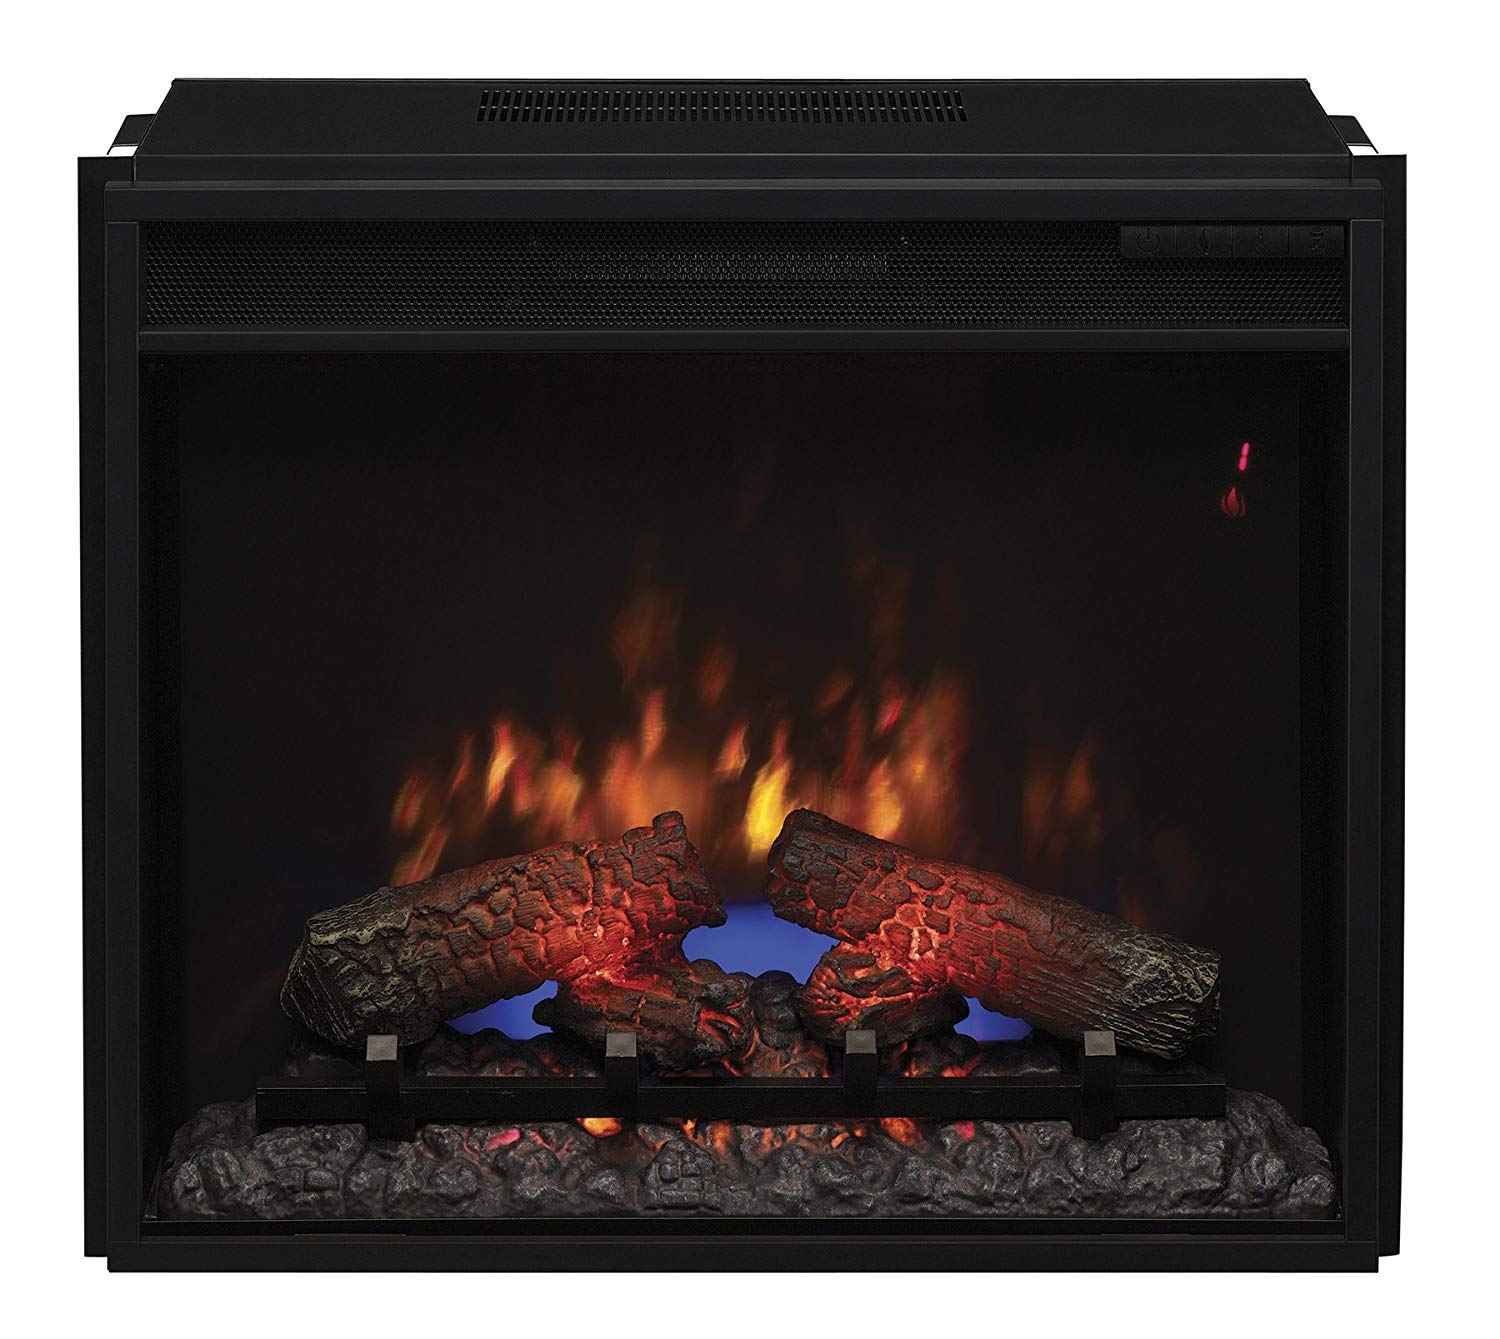 Electric Fireplace Surround Ideas Fresh Classicflame 23ef031grp 23" Electric Fireplace Insert with Safer Plug